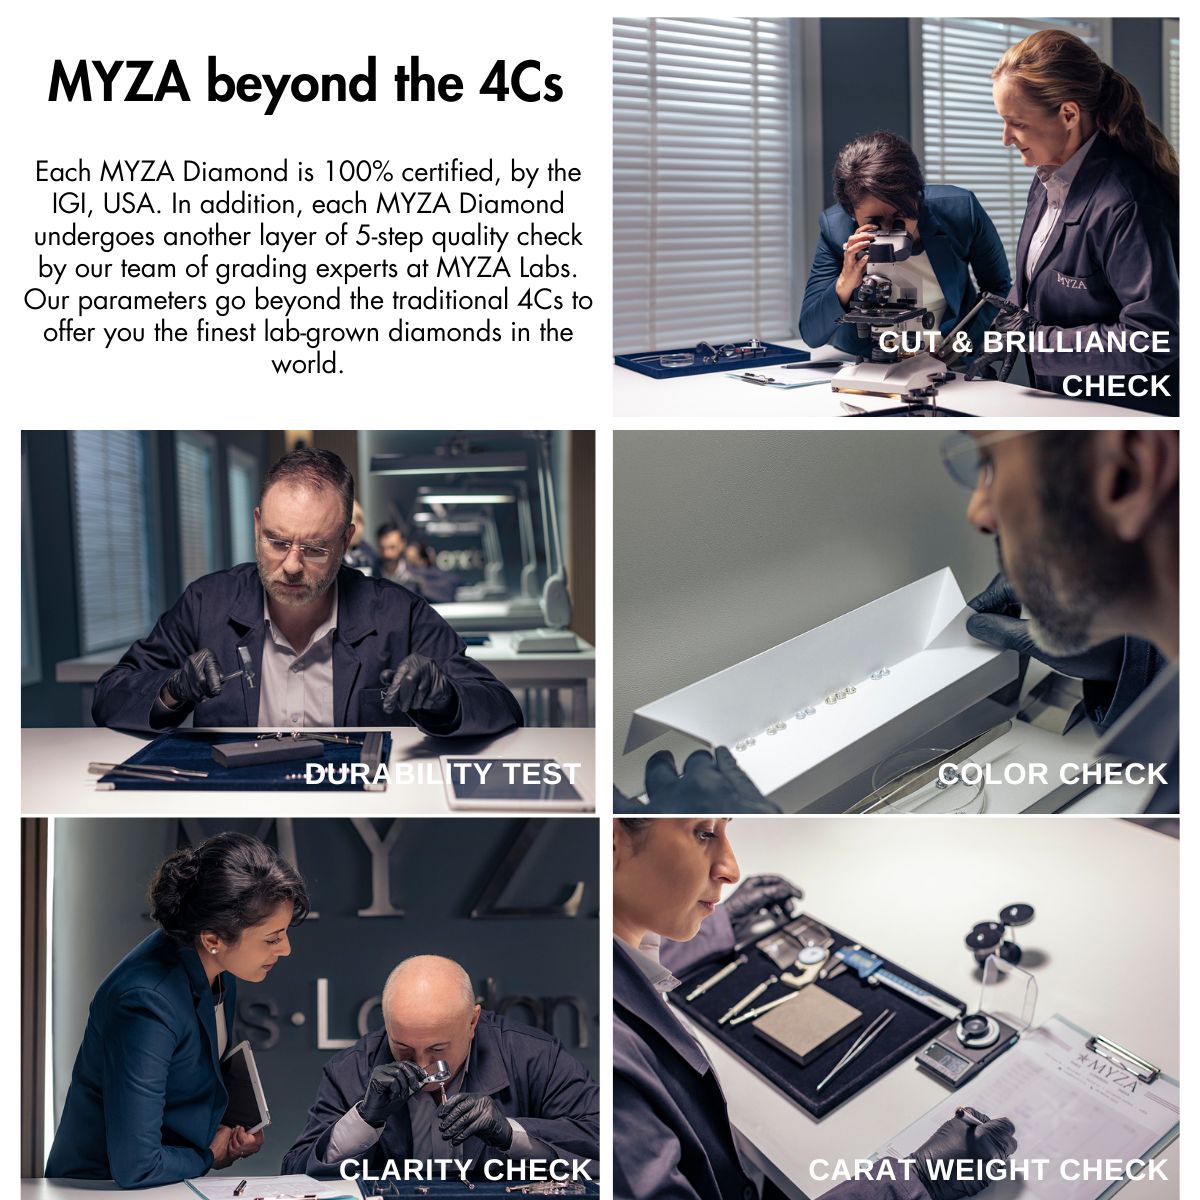 MYZA Beyond 4Cs 5 step quality check ensures brilliance, durability, color, clarity, and carat weight. ISO, BIS certification, and hallmark guarantee standards. Explore MYZA's certified jewelry for trusted quality and timeless elegance.